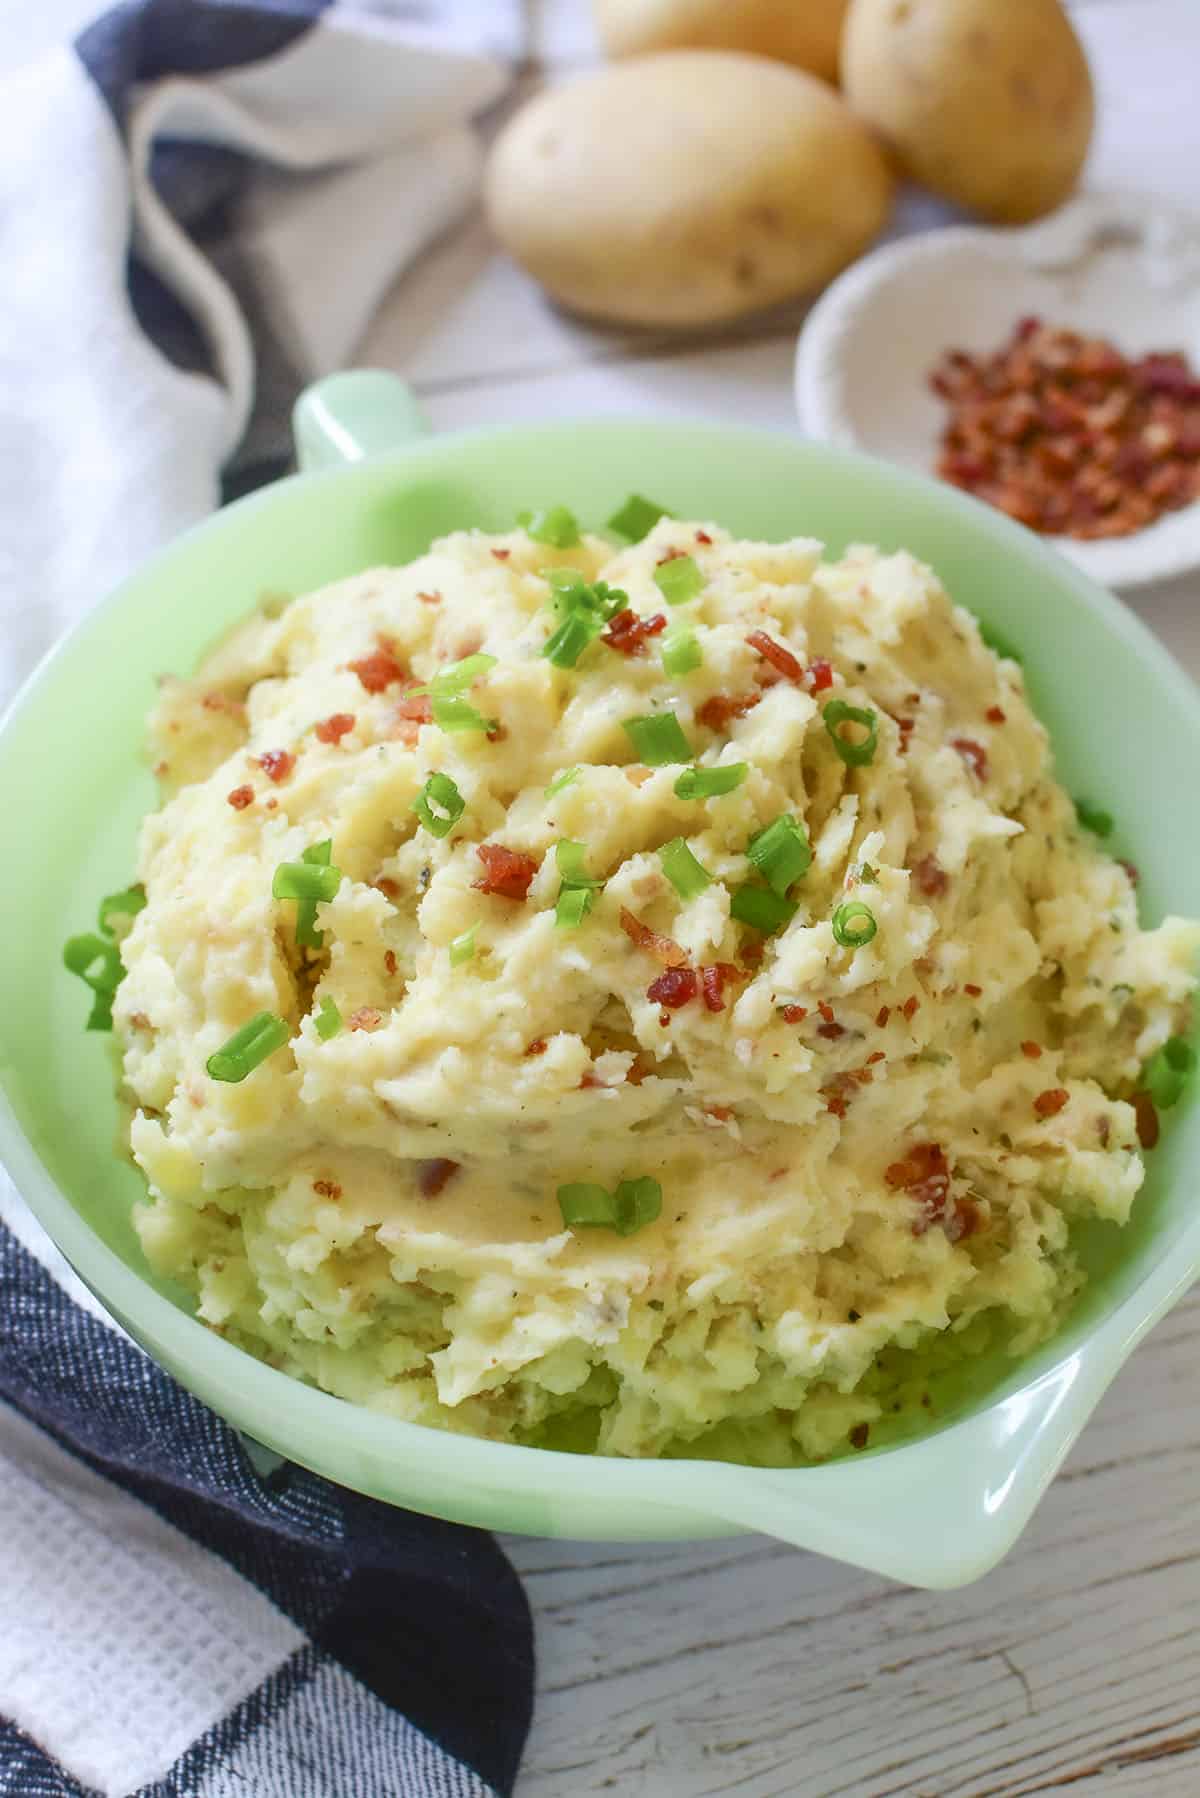 A close up photo of mashed potatoes with bacon bits and green onion sprinkled on top.